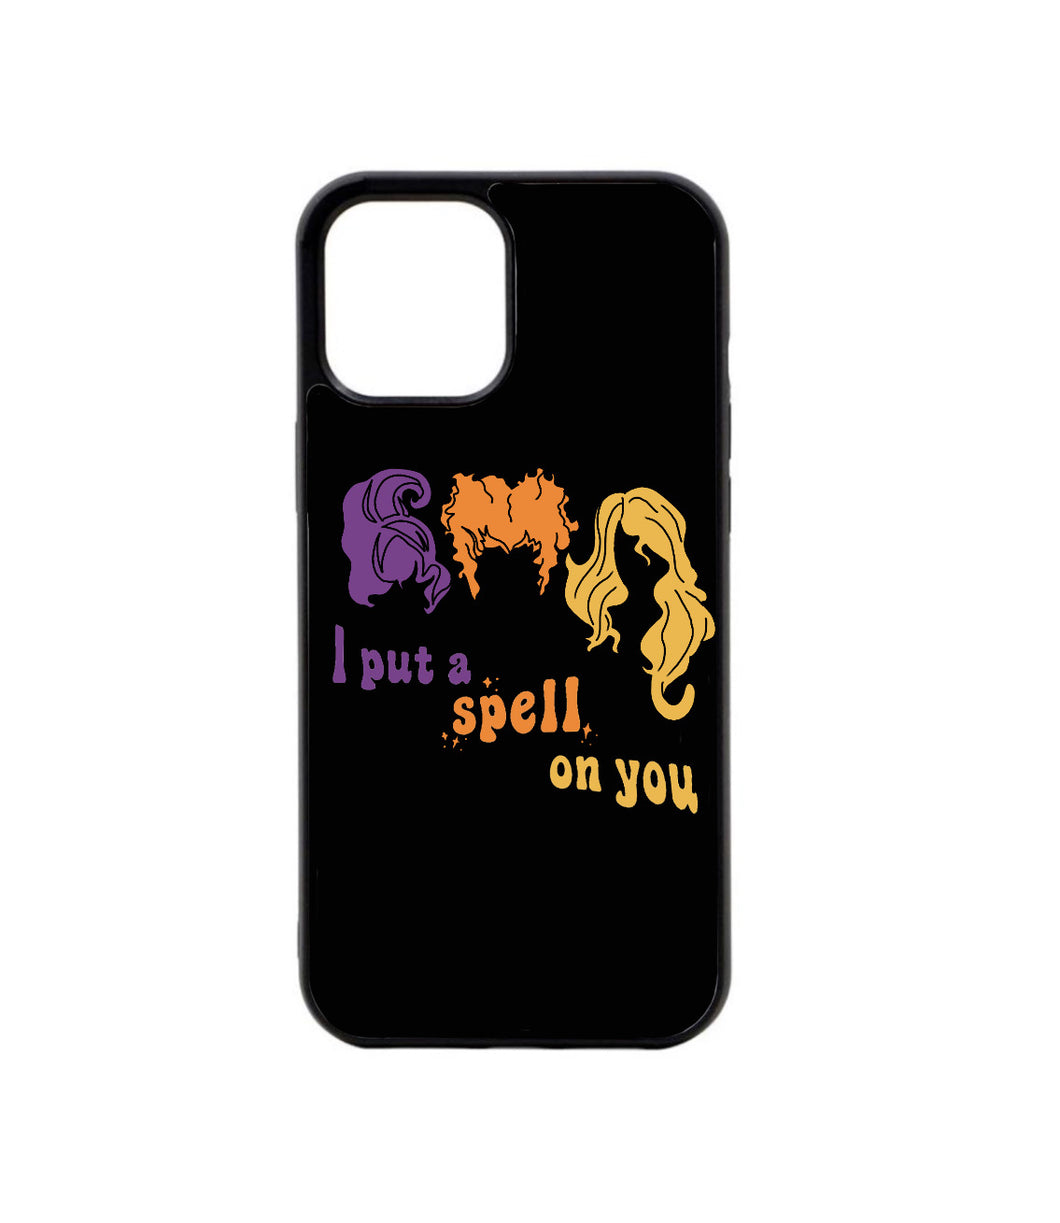 Spell on you Case